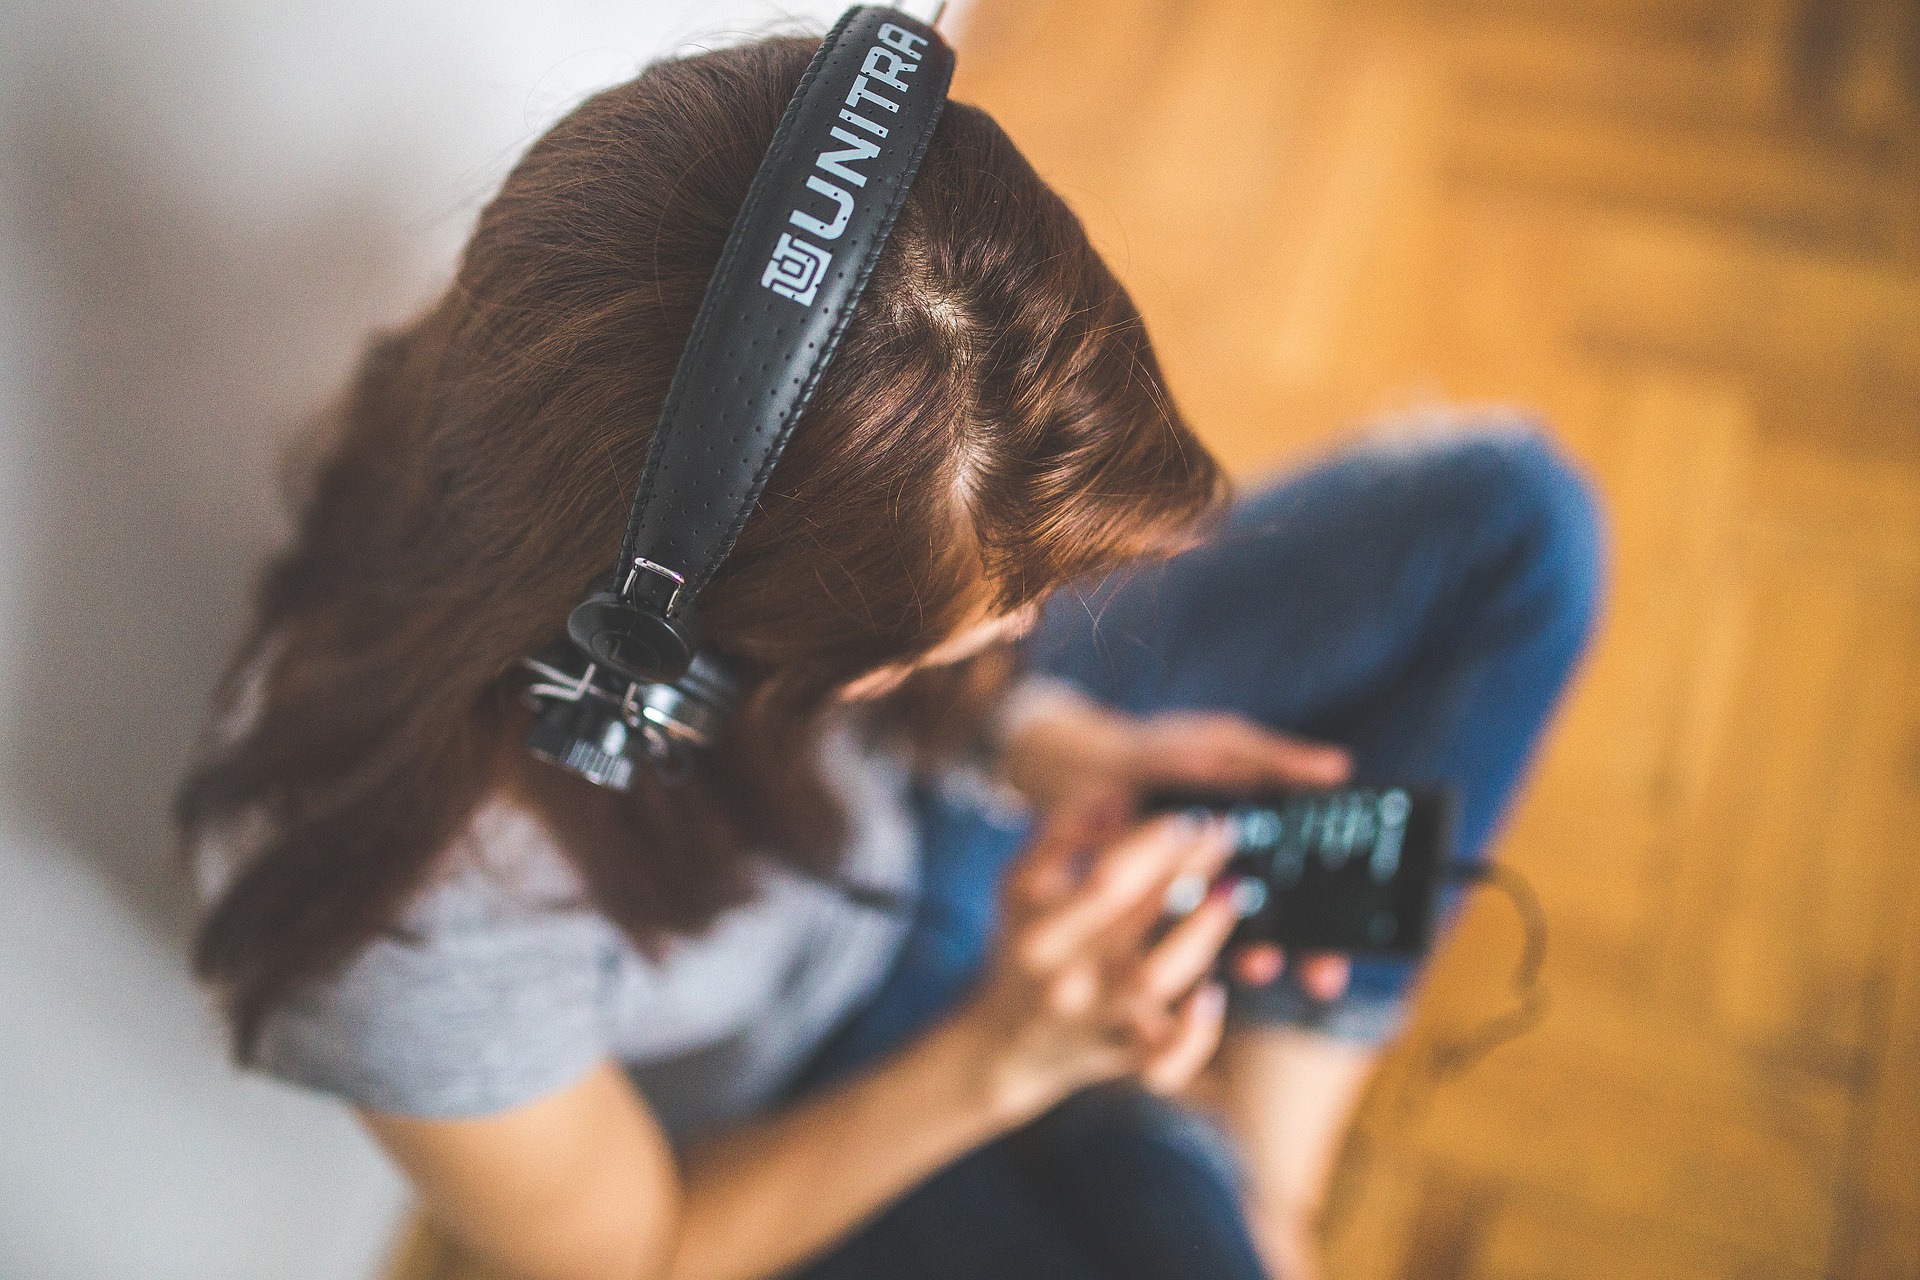 Listening To Music Reduces Stress, Boosts Mood: Study